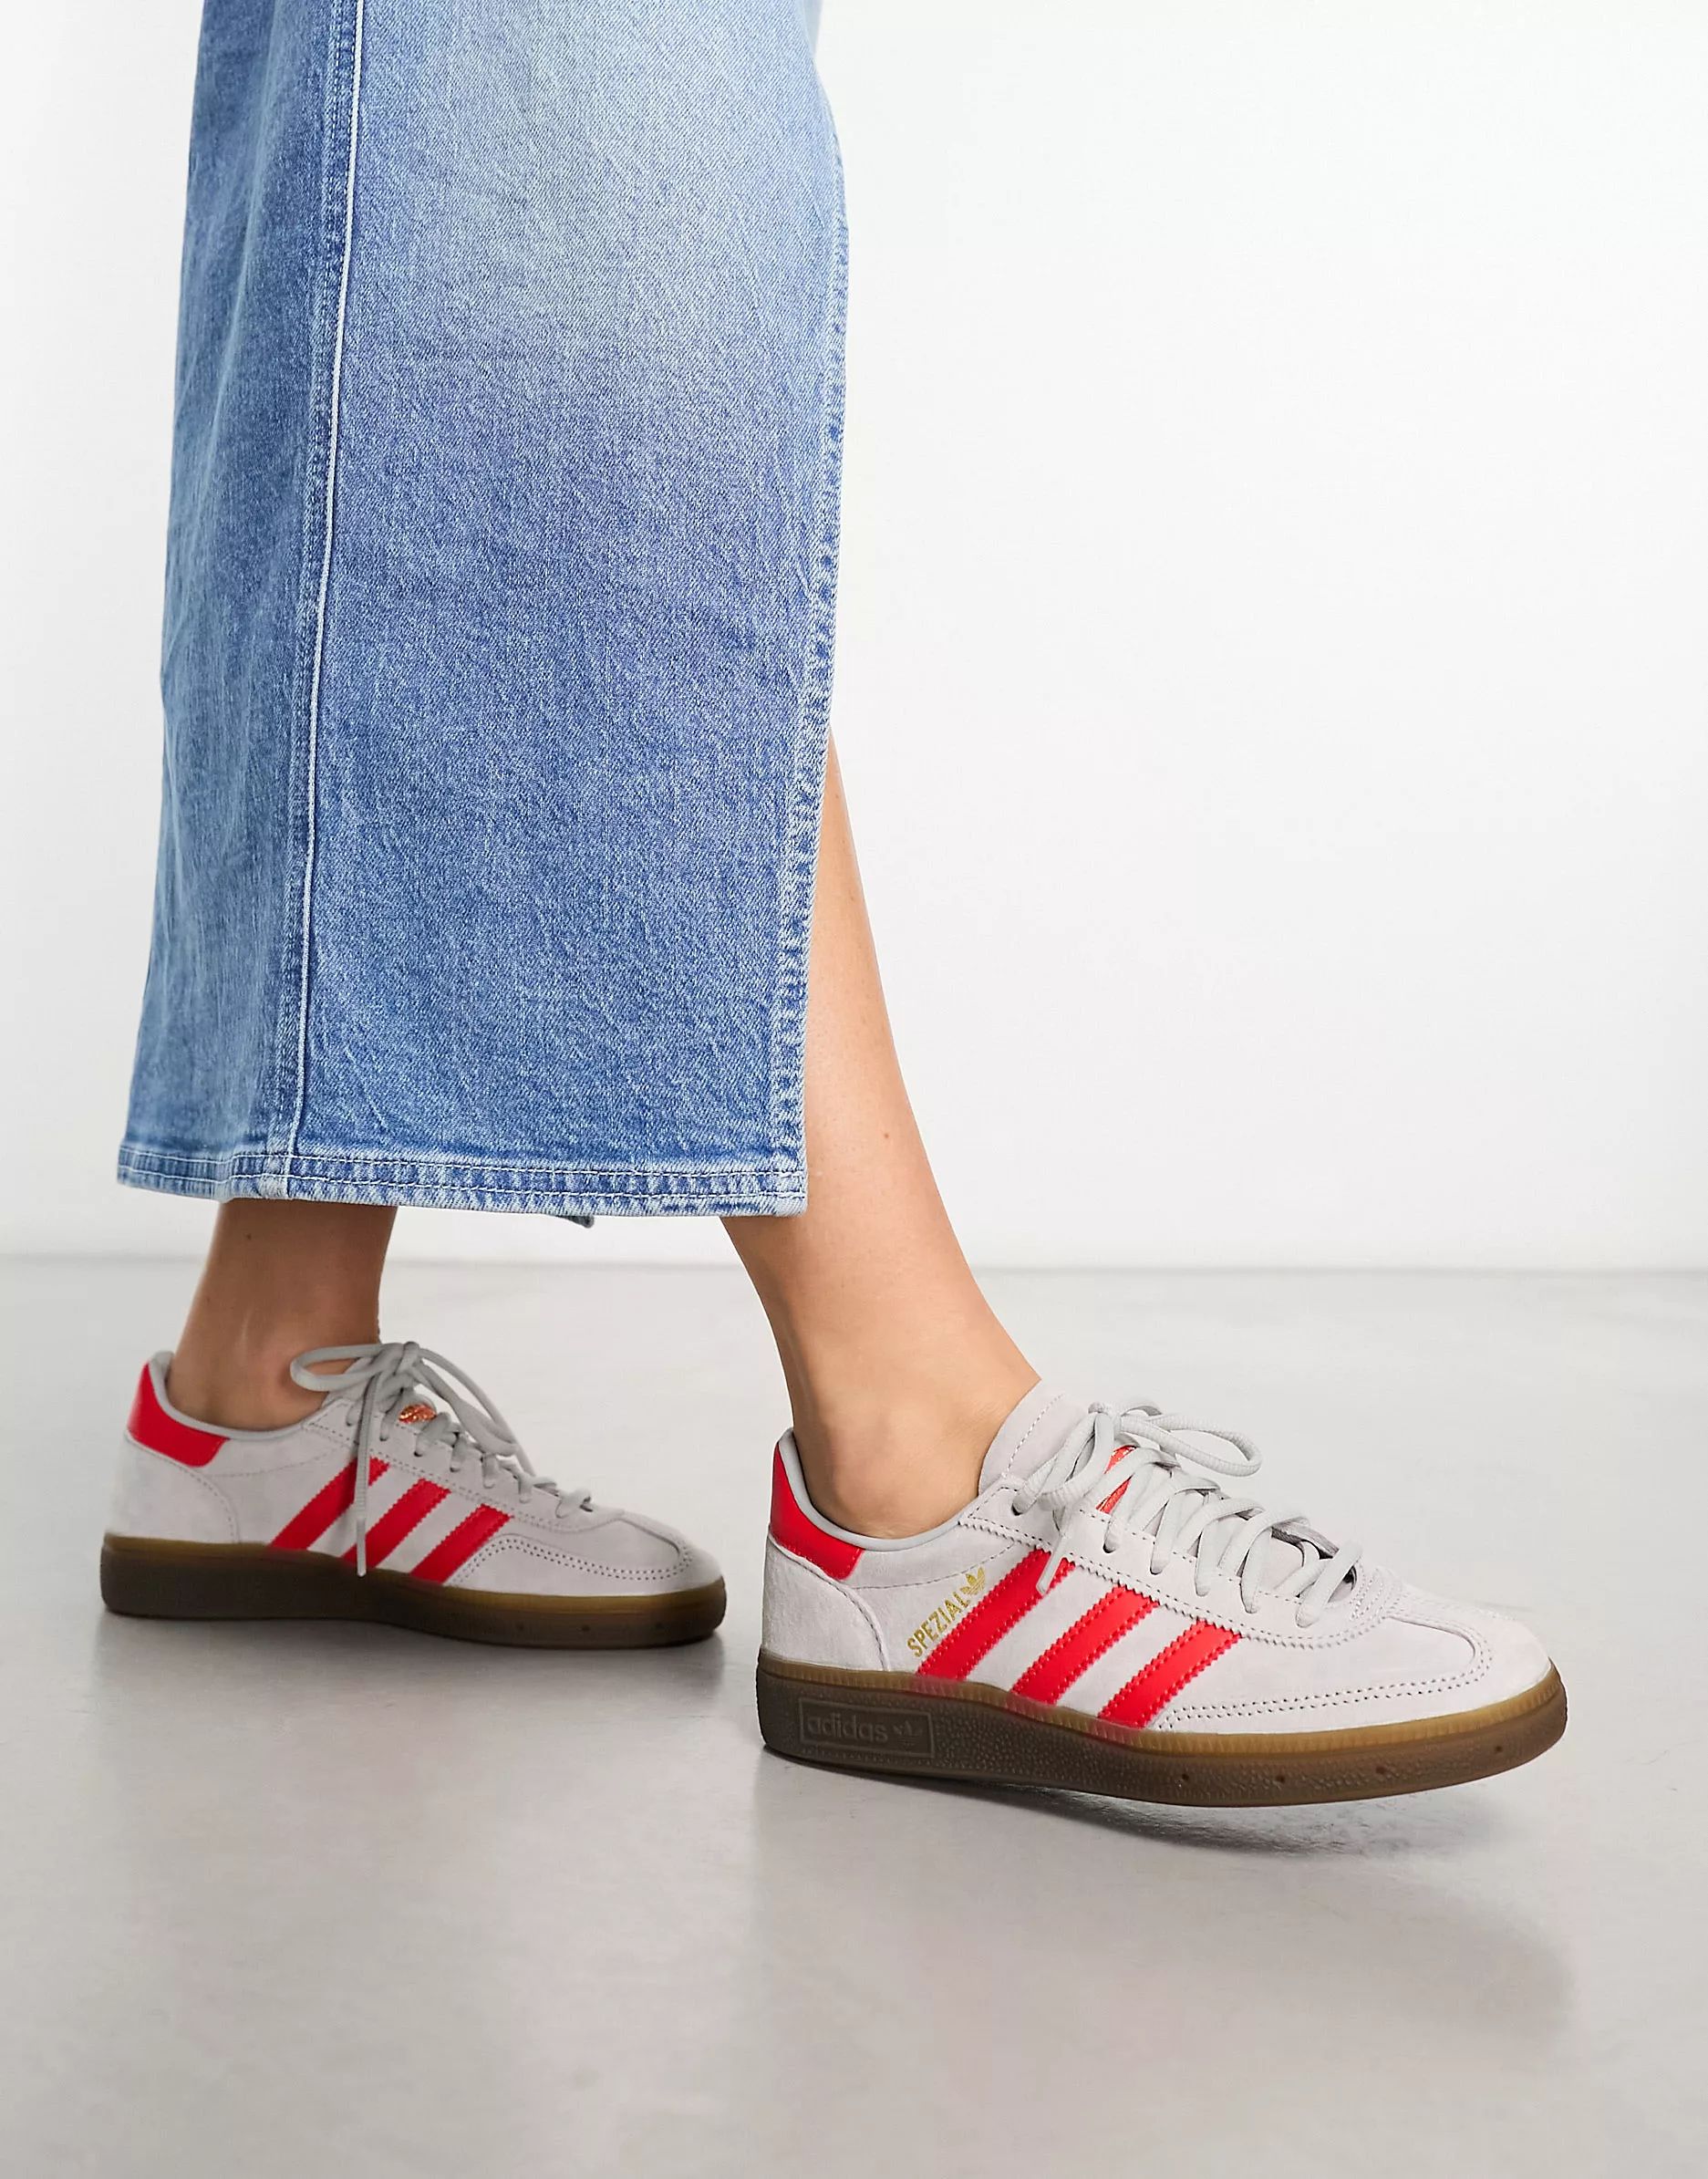 adidas Originals Handball Spezial gum sole trainers in grey and red | ASOS (Global)